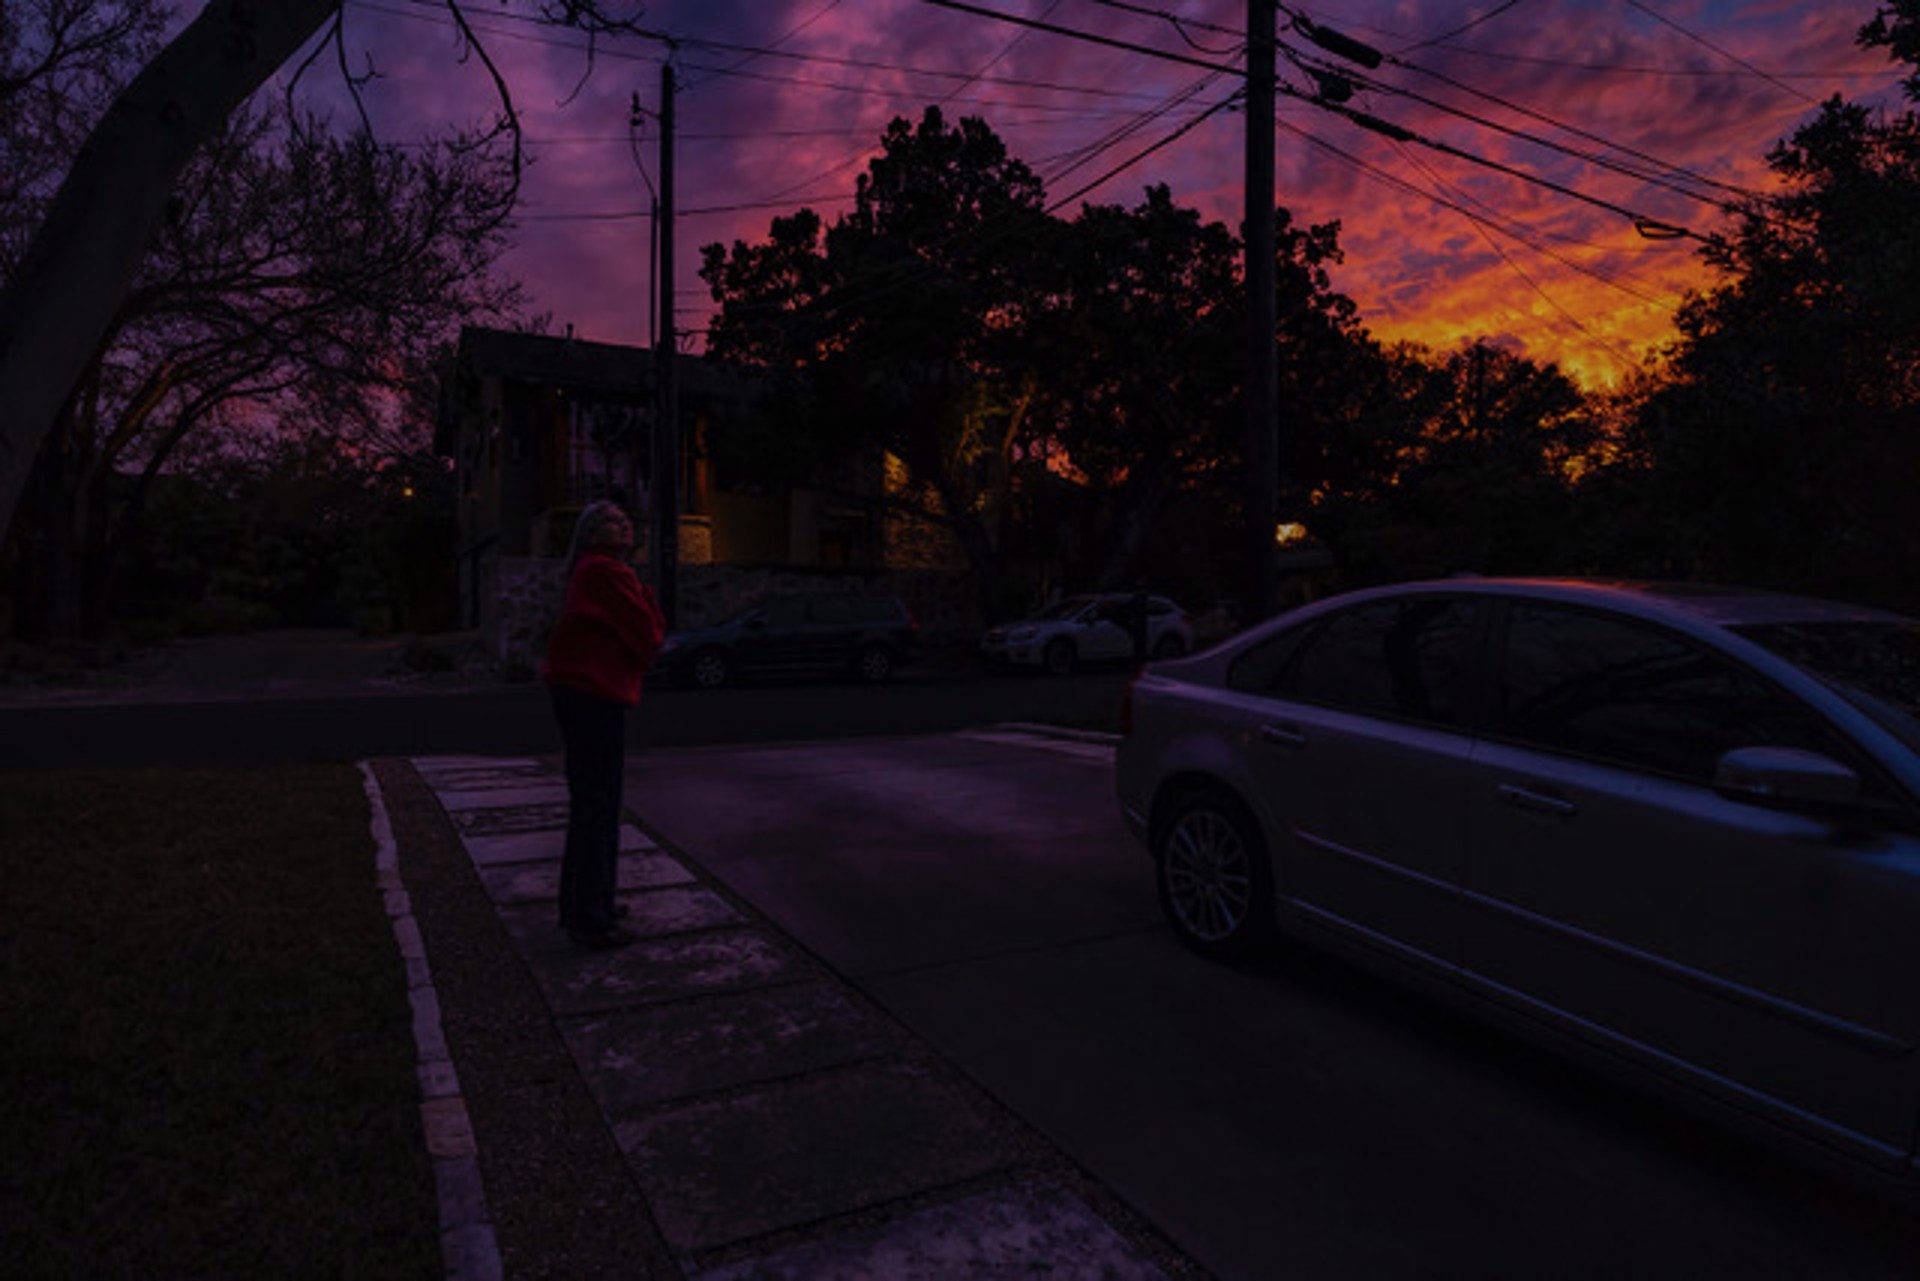 From Around the House During the Pandemic, Grace Checking Out a Beautiful Sunset in the Front Yard, Texas by Lawrence McFarland